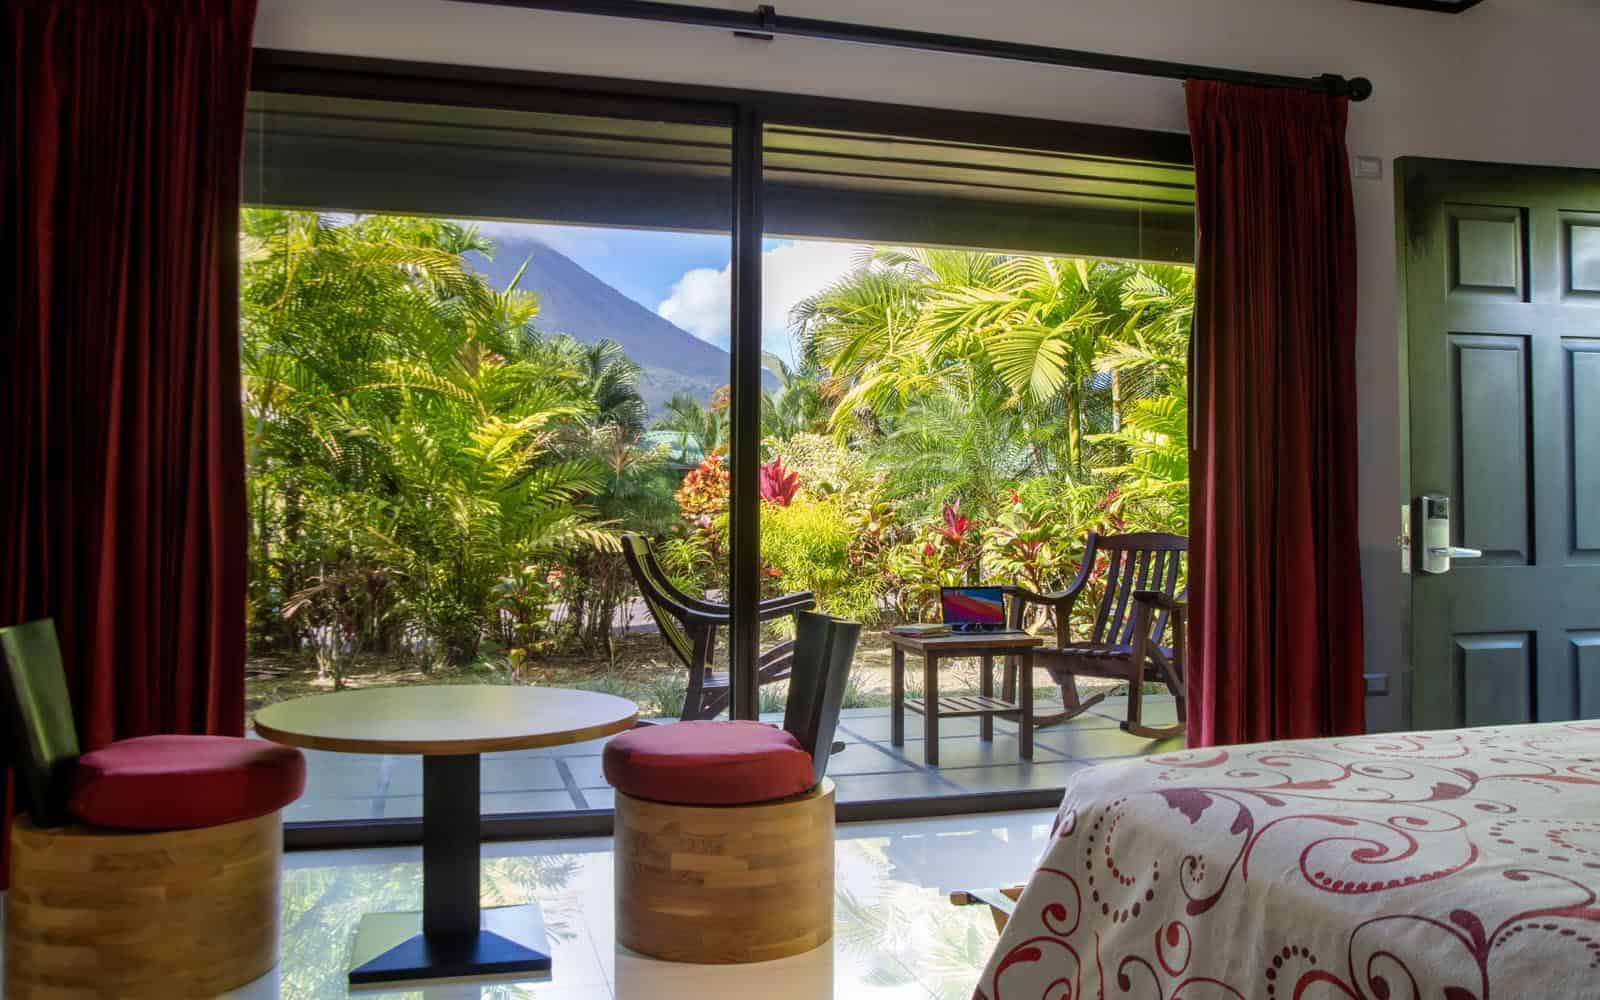 Arenal Manoa Hotel and Spa